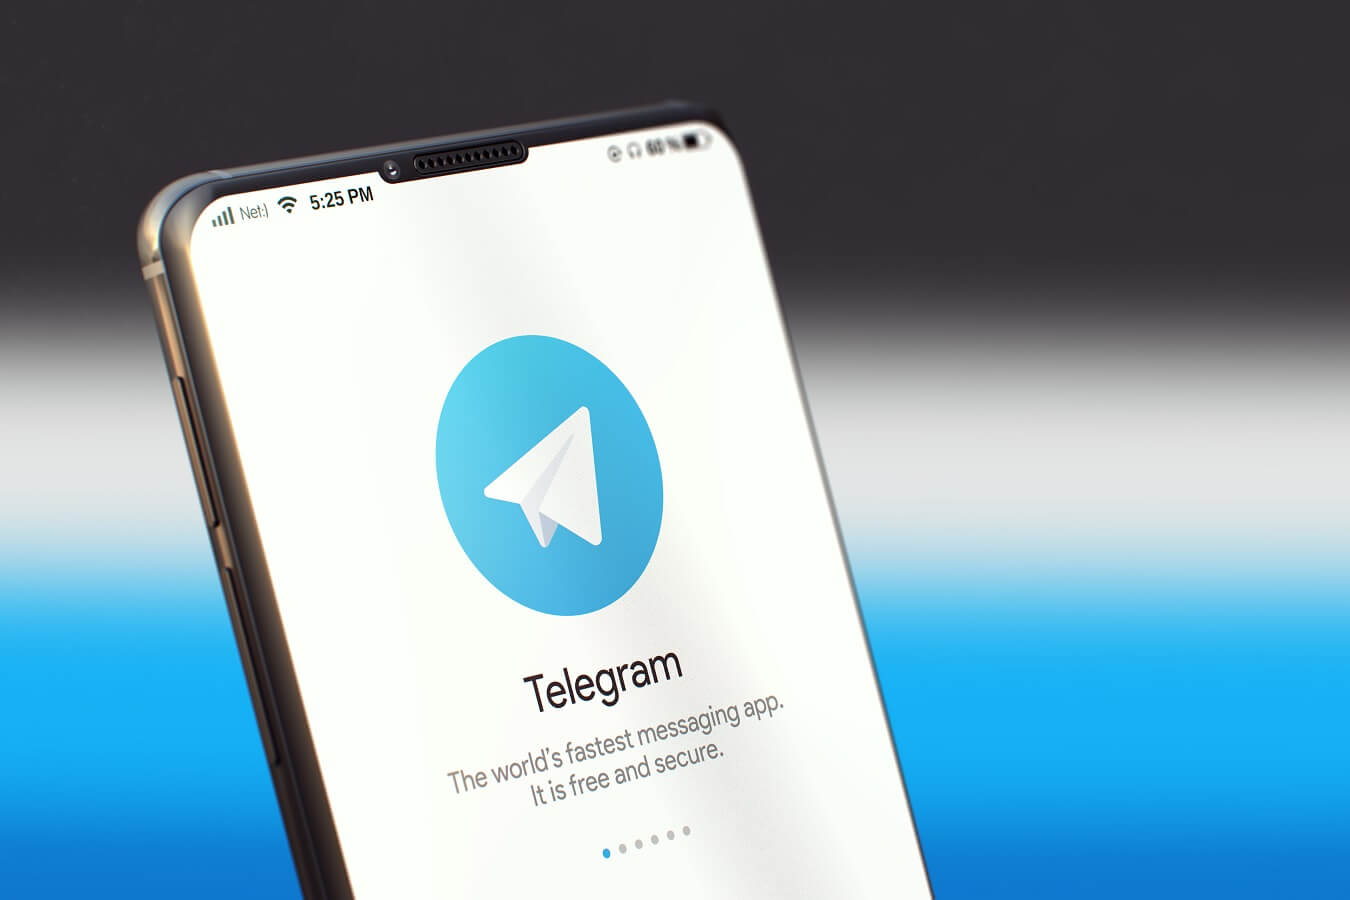 Telegram Messenger App Launches USDT Transfer Feature Within Chats, Expanding Crypto Services – Crypto Adoption on the Rise?